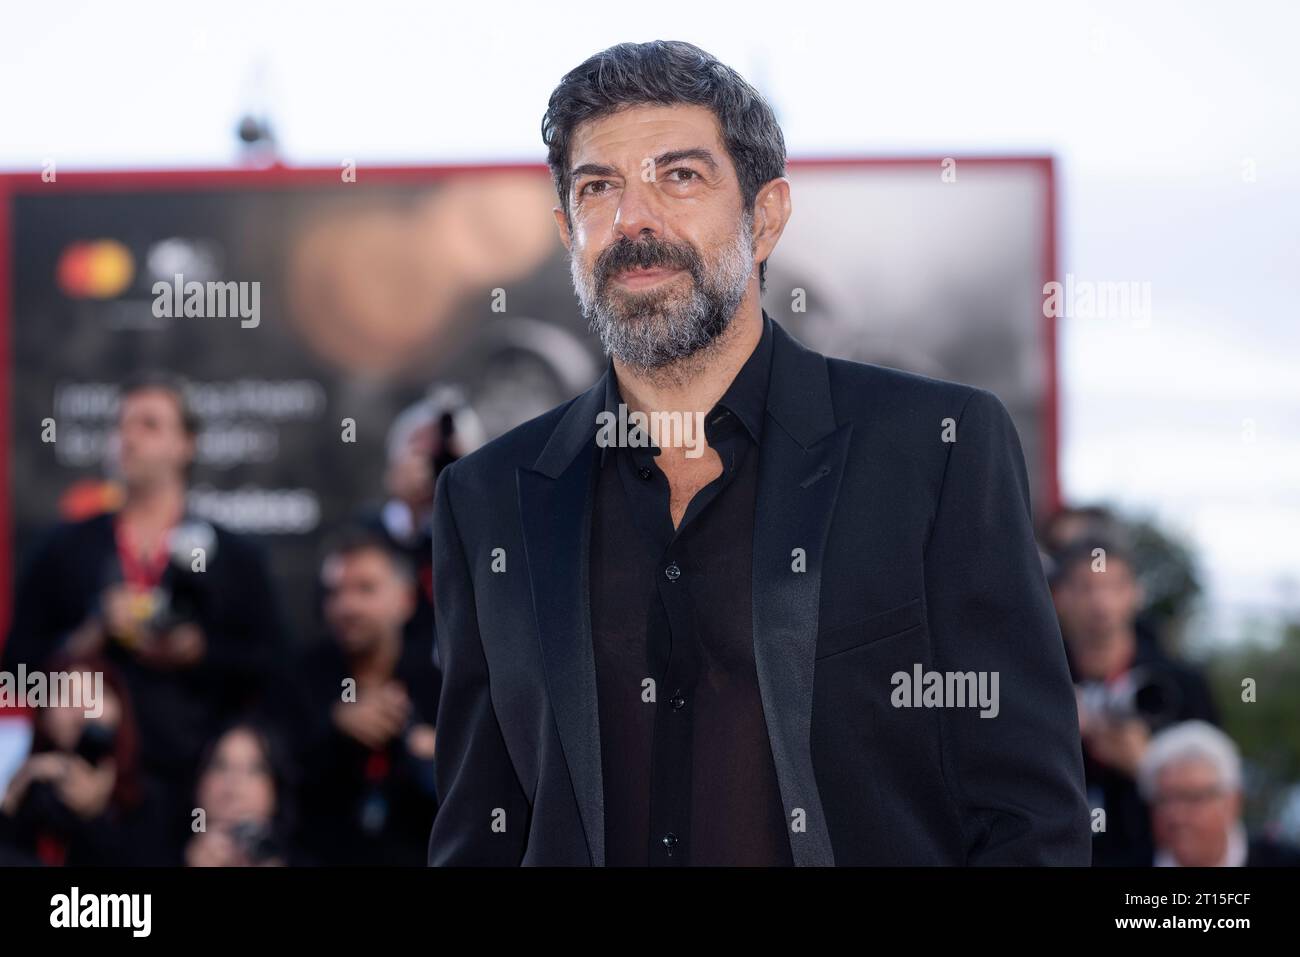 VENICE, ITALY - AUGUST 30: Actor Pierfrancesco Favino attends the red carpet for the movie 'Comandante' at the 80th Venice International Film Festival Stock Photo